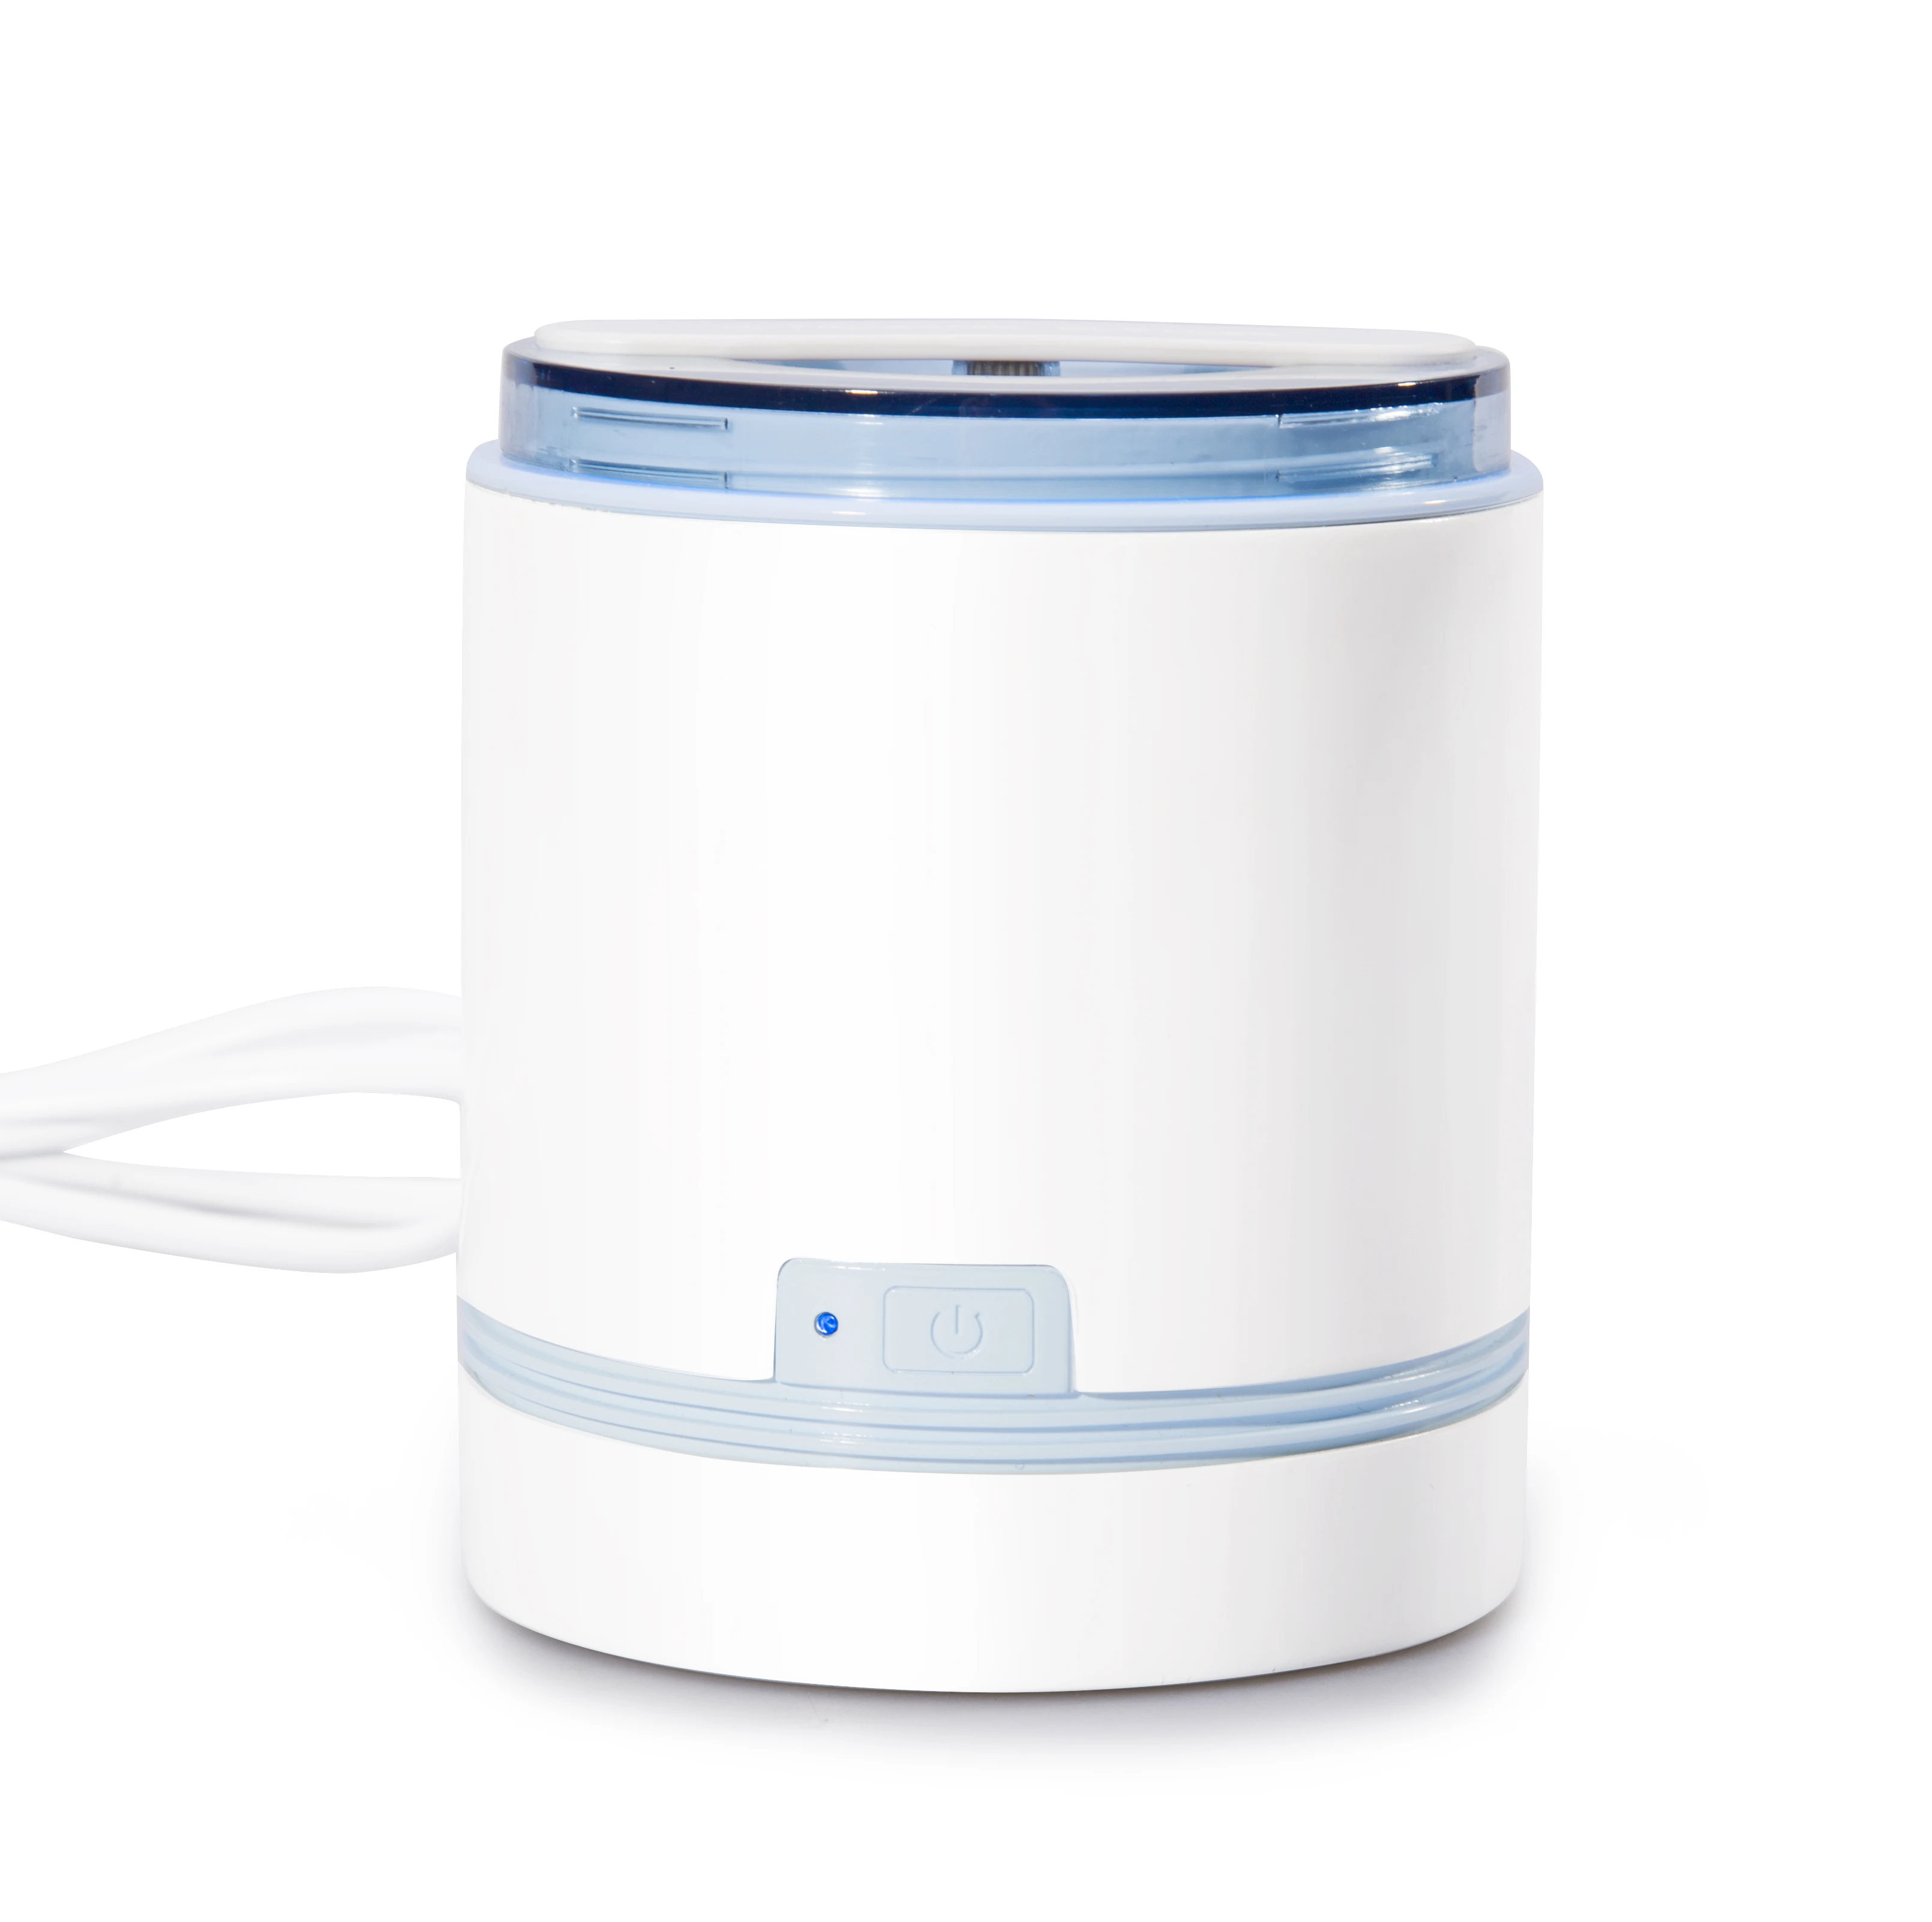 Wired rechargeable ultrasonic cleaner